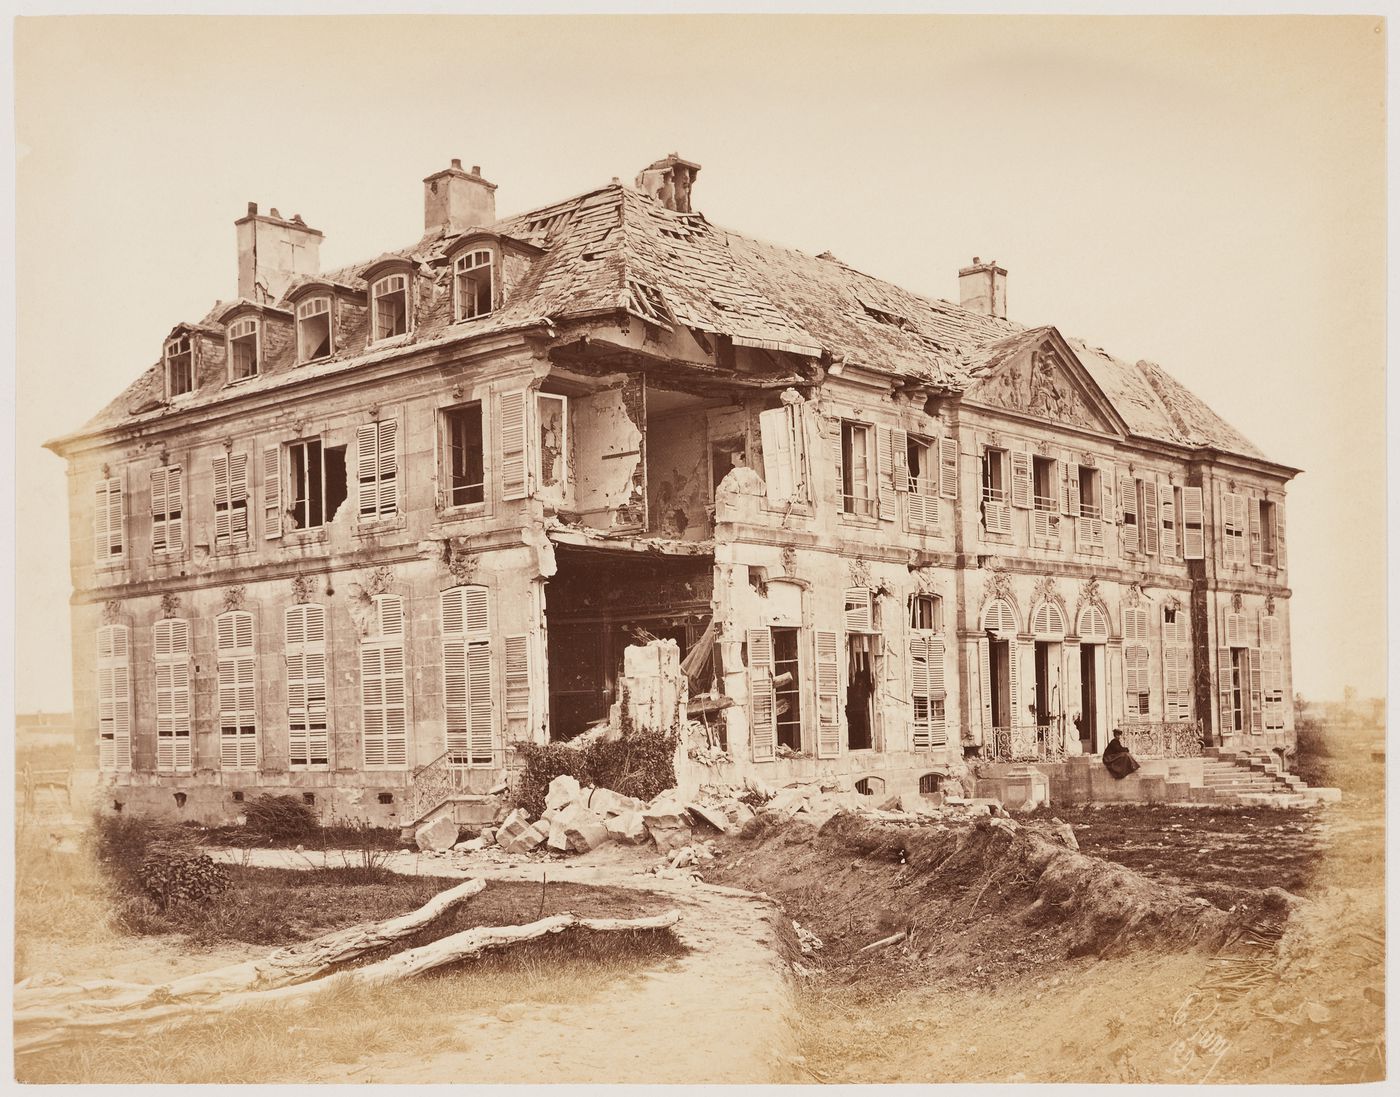 View of the Château de Meudon [?] showing a woman on the right after the Paris Commune uprising of 1871, Meudon [?], France